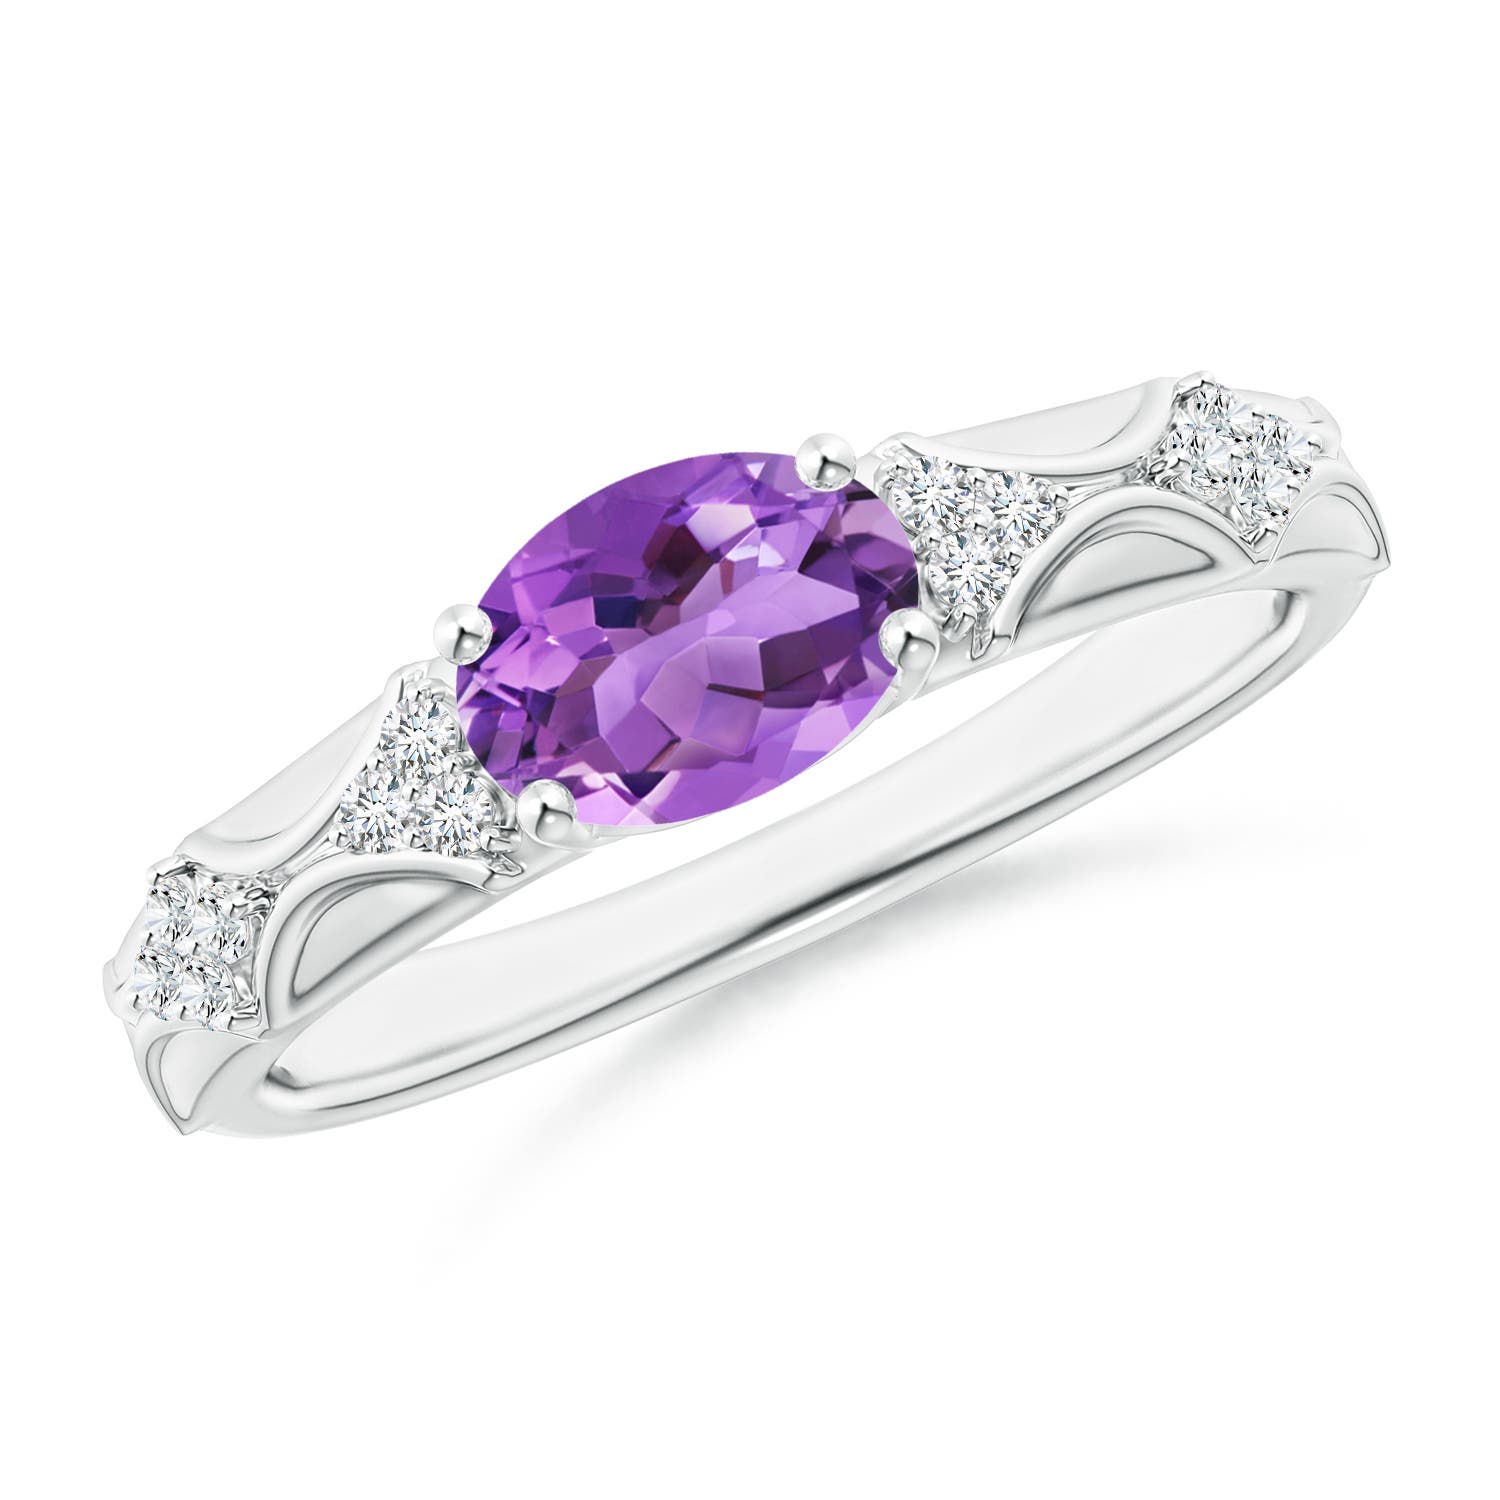 AA - Amethyst / 1.22 CT / 14 KT White Gold